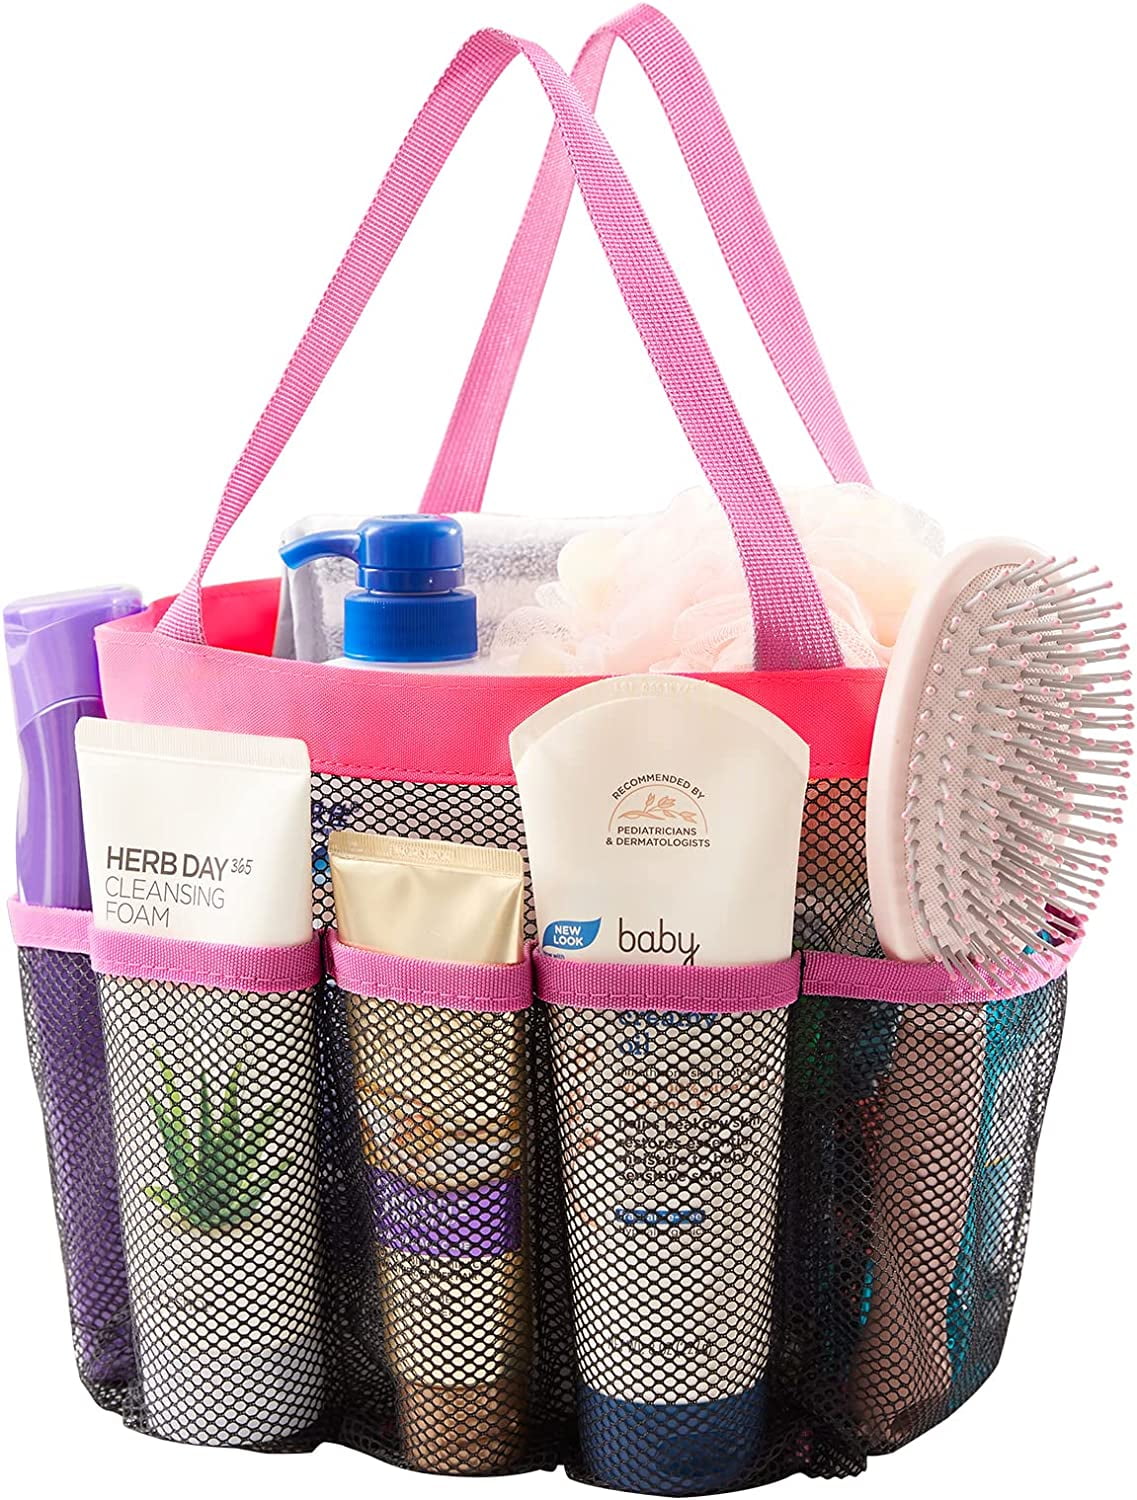 Lifewit Mesh Shower Caddy Portable Shower Tote Bag for Collegue